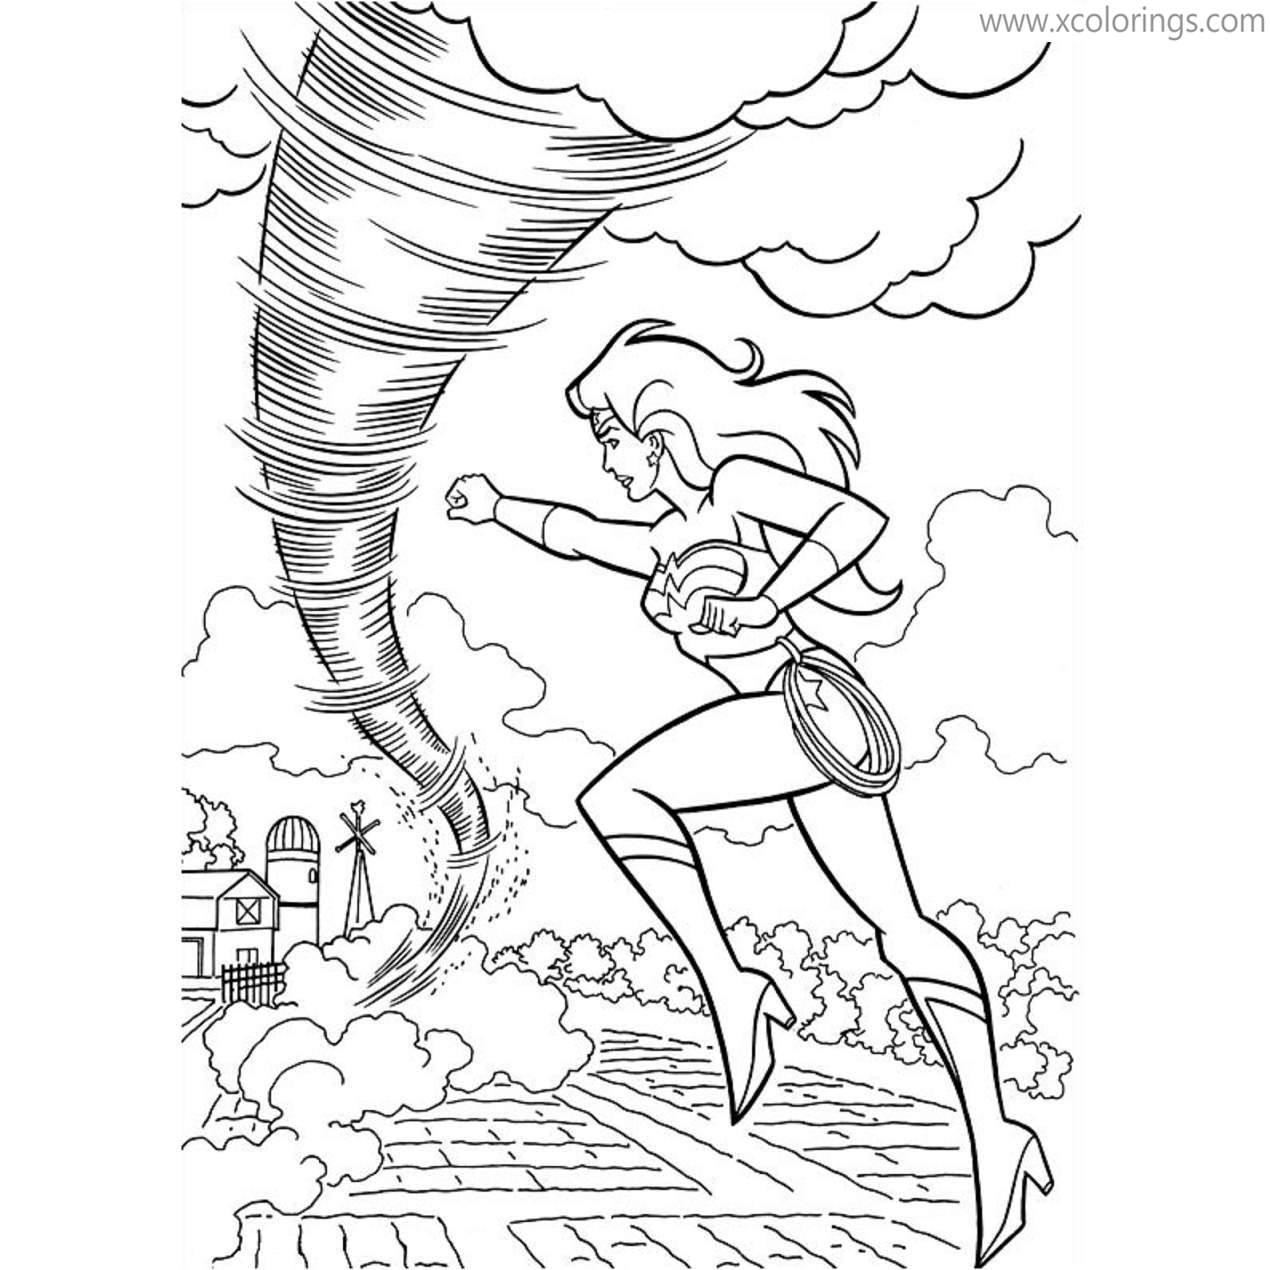 Free Animated Wonder Woman Coloring Pages With Tornado printable